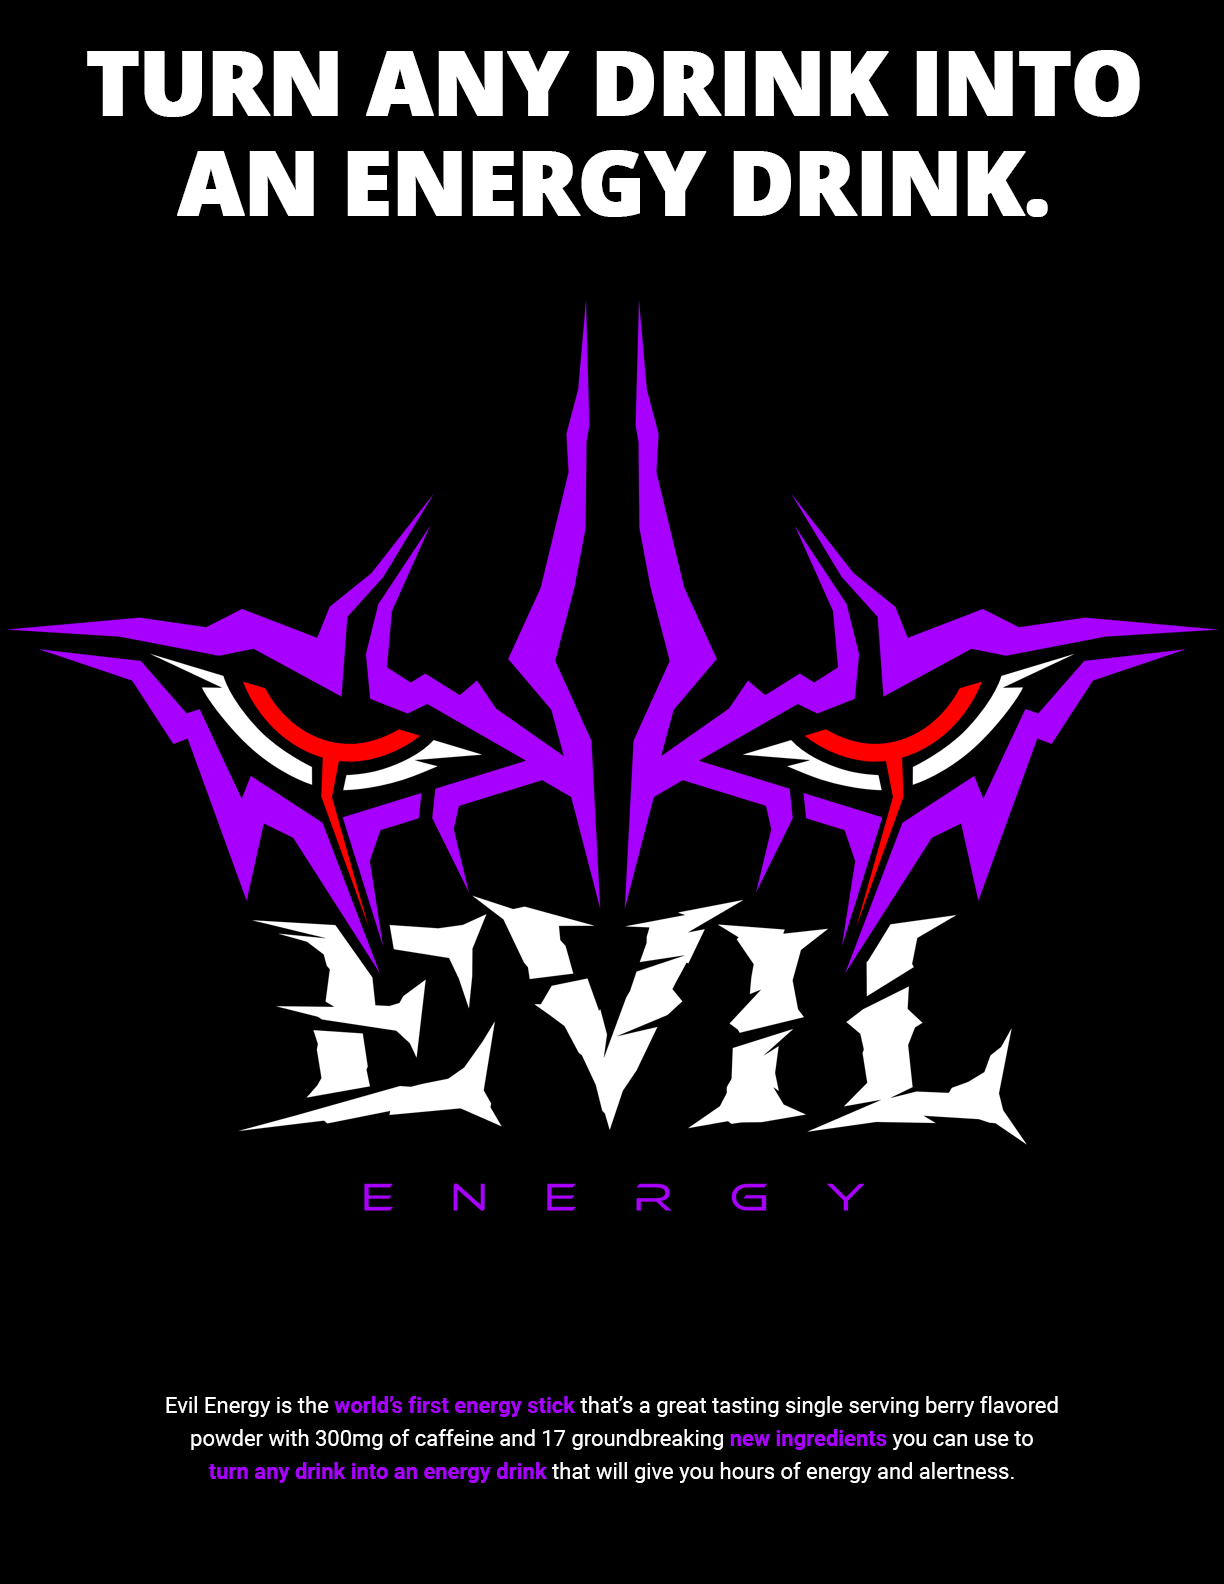 Turn Any Drink Into an Energy Drink!